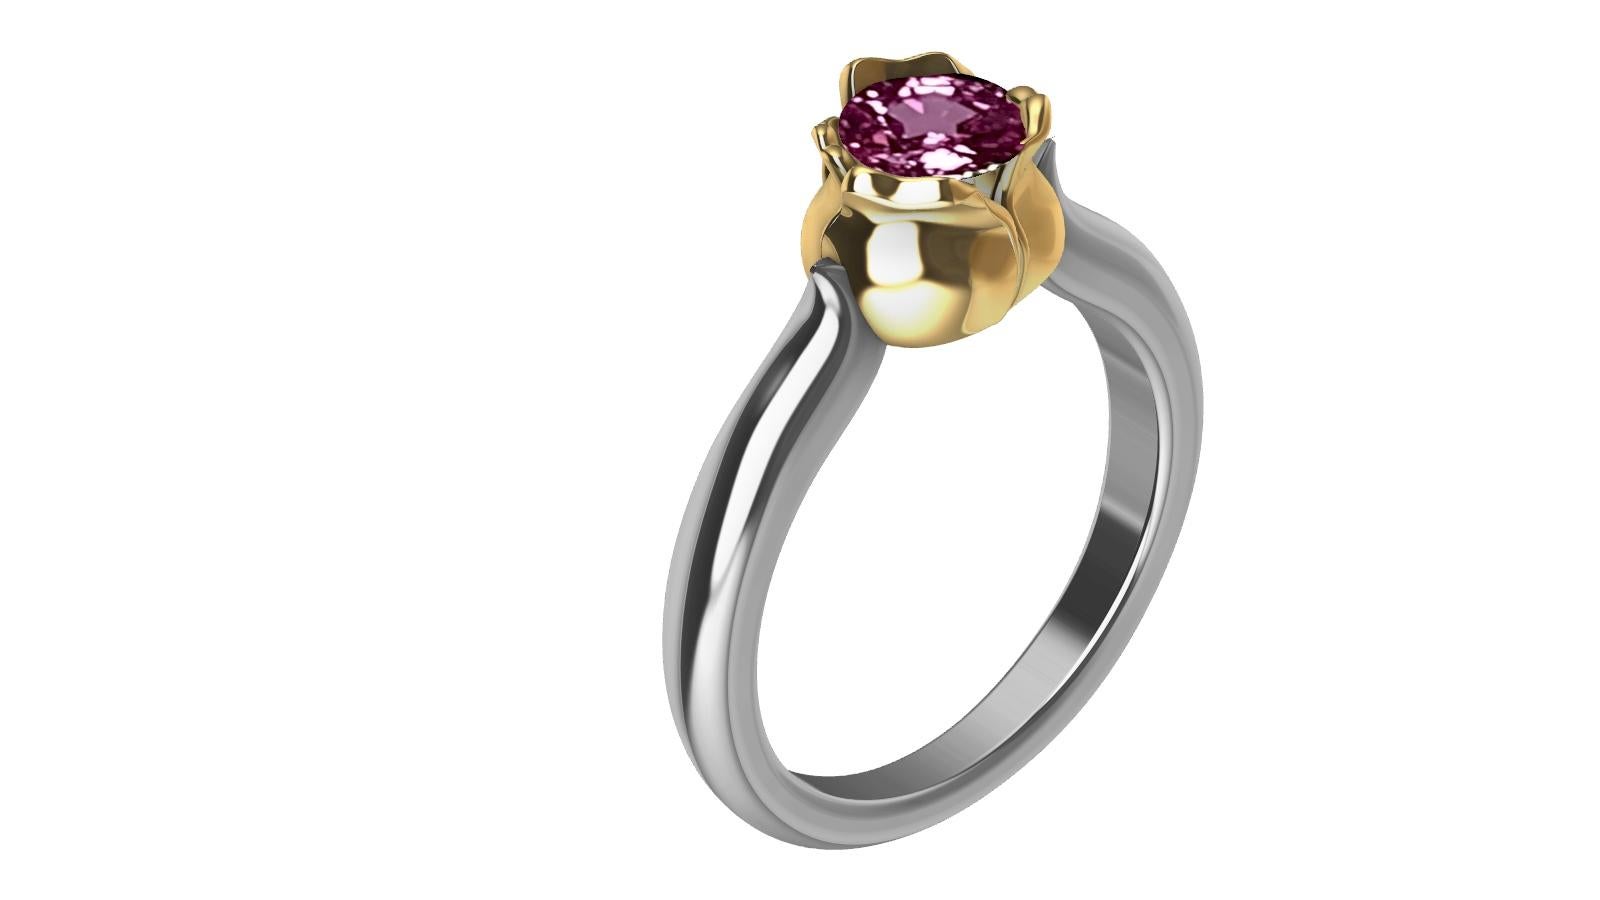 For Sale:  18 Karat Yellow Gold and Platinum Ceritfied Pink Sapphire 1.18 Carat Tulip Ring 5